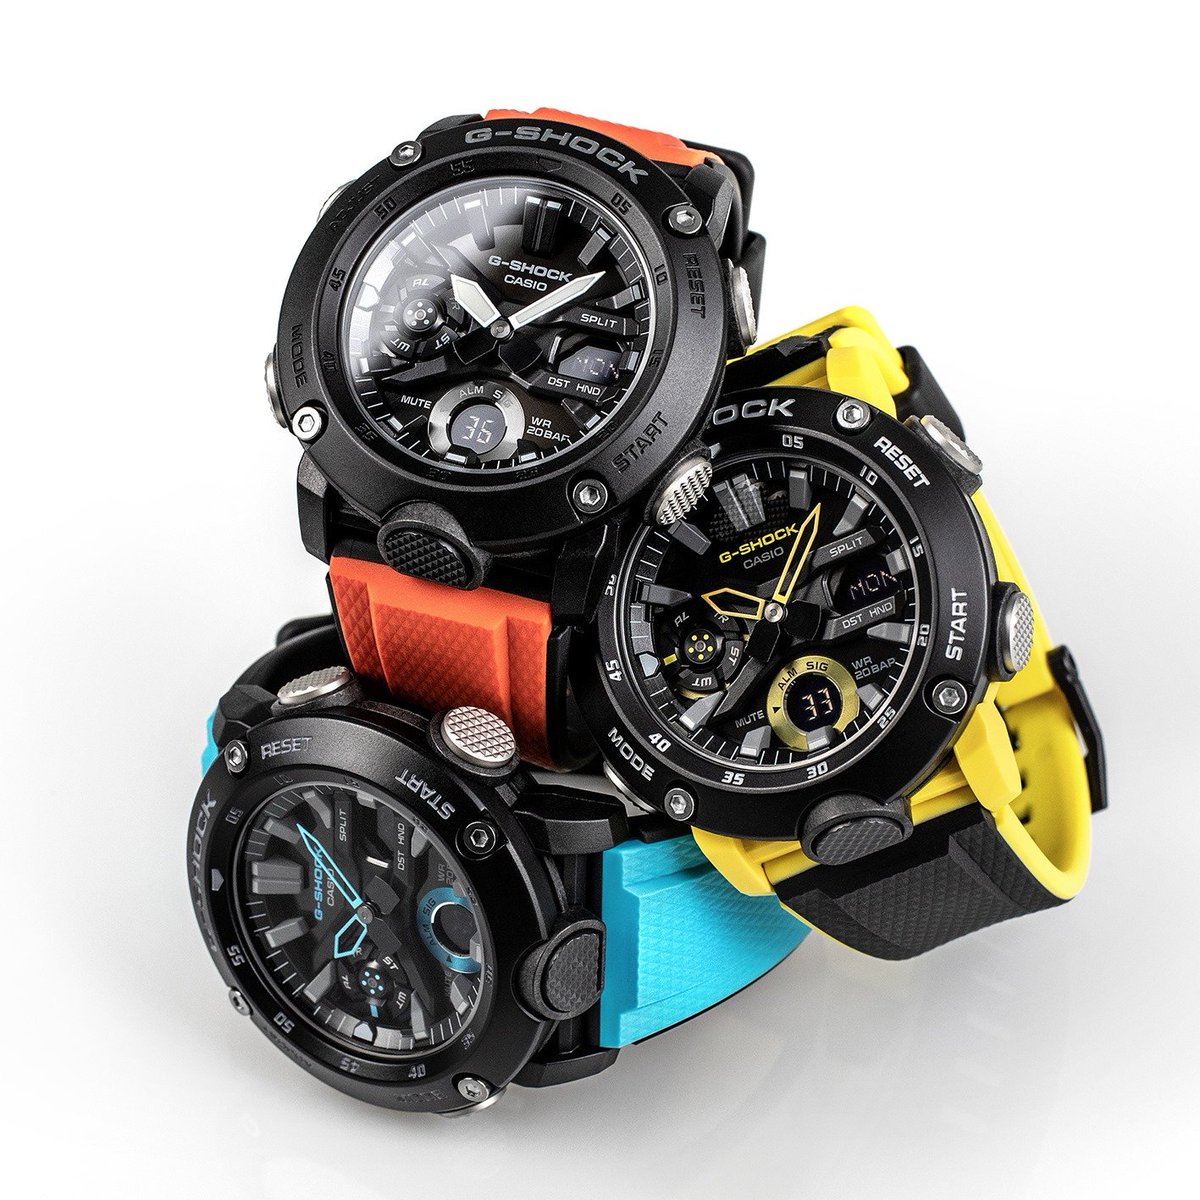 G Shock Hk Javys Carbon Core Guard Structure From G Shock The Watch That Is Constantly Testing New Limits In Timekeeping Toughness Comes A New Series With Carbon Core Guard Structure